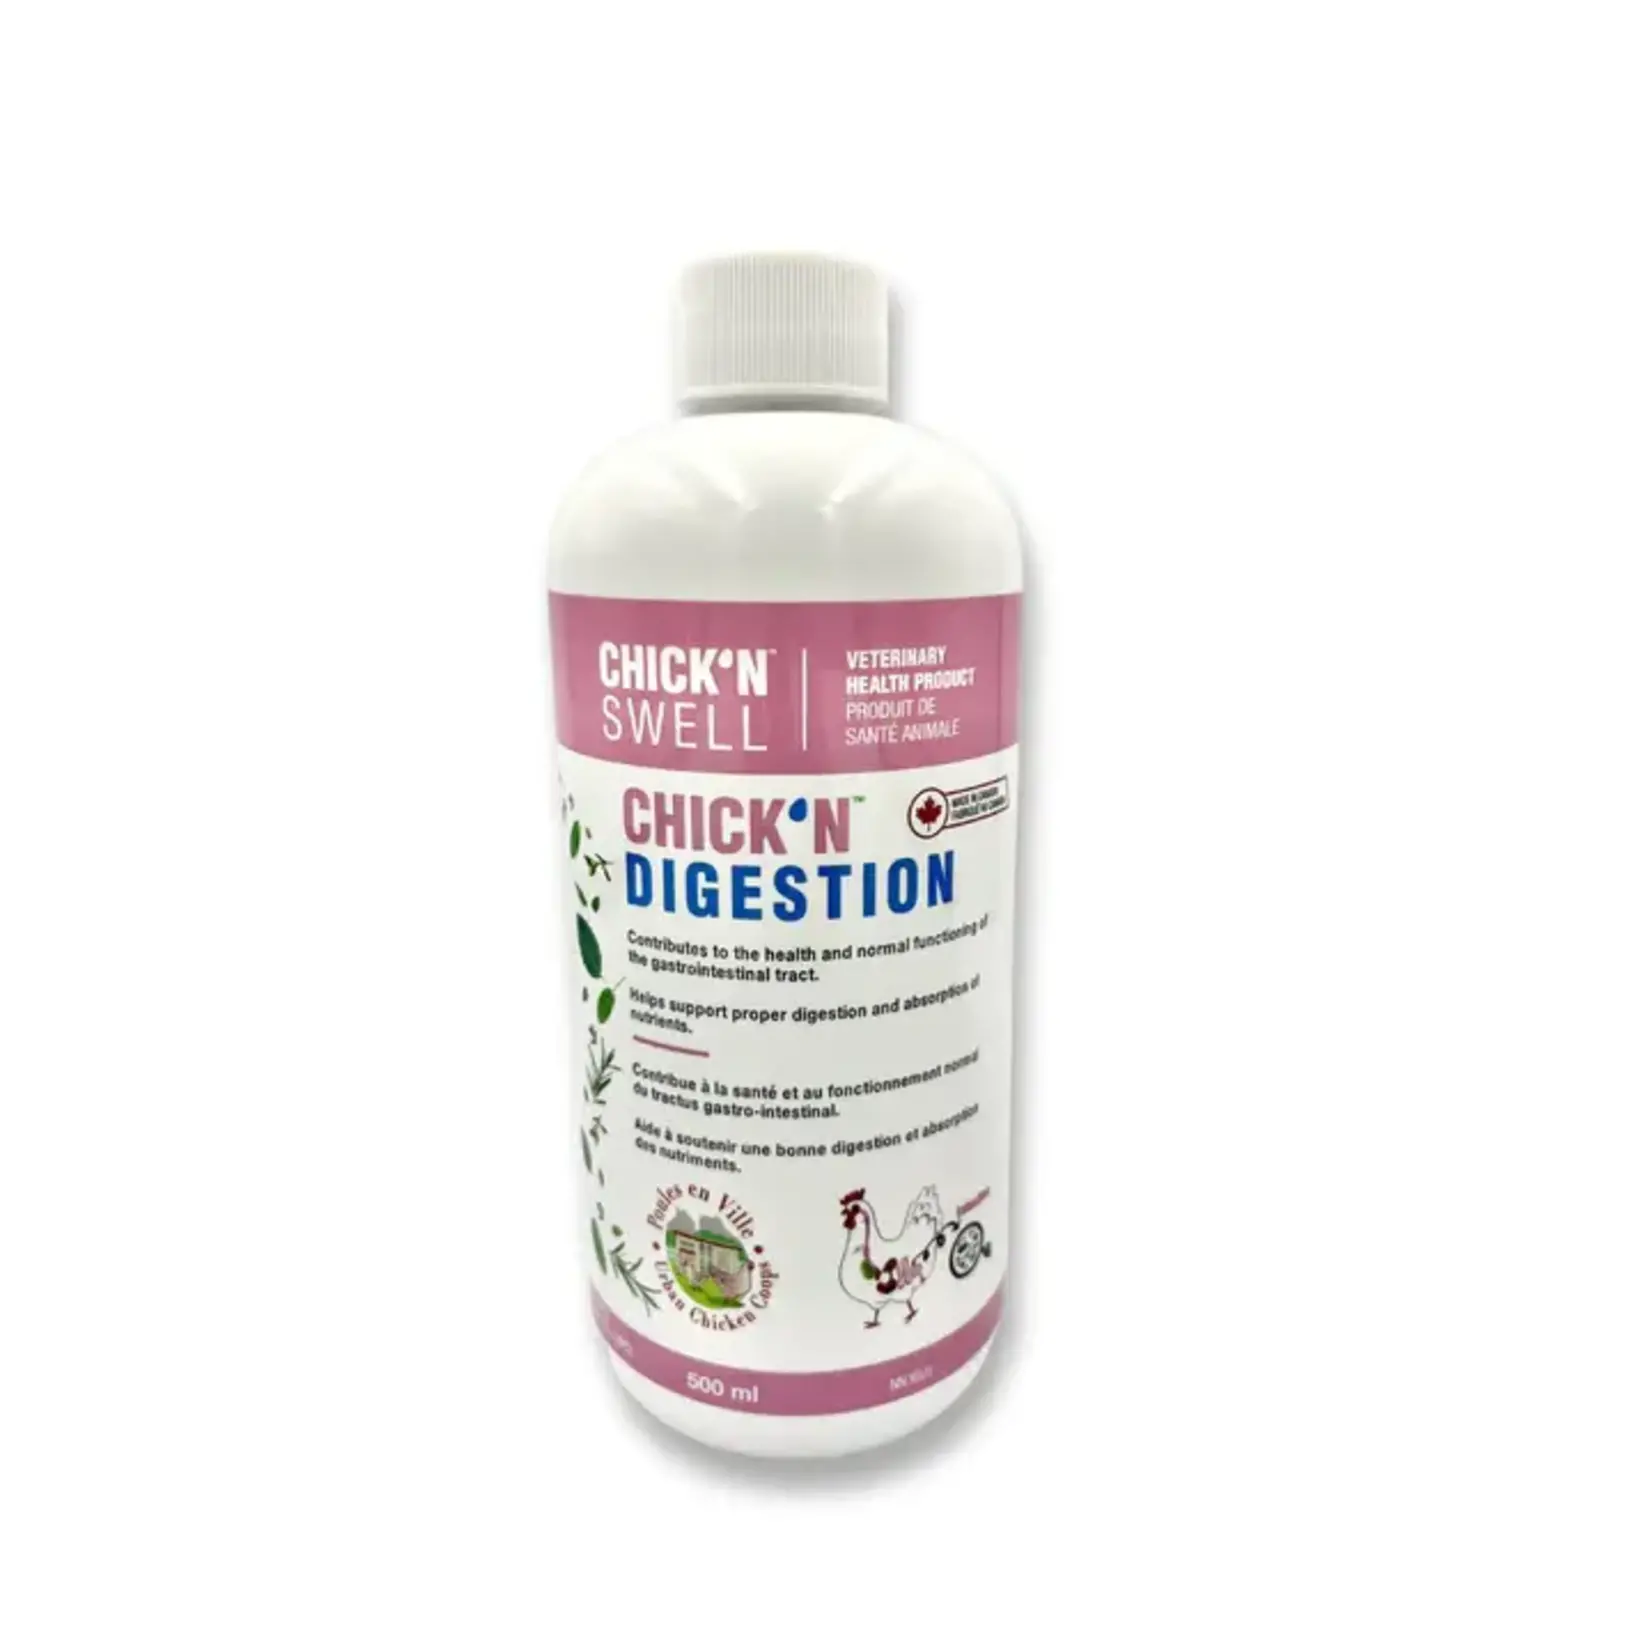 CHICK'N SWELL CHICKN DIGESTION 500 ML